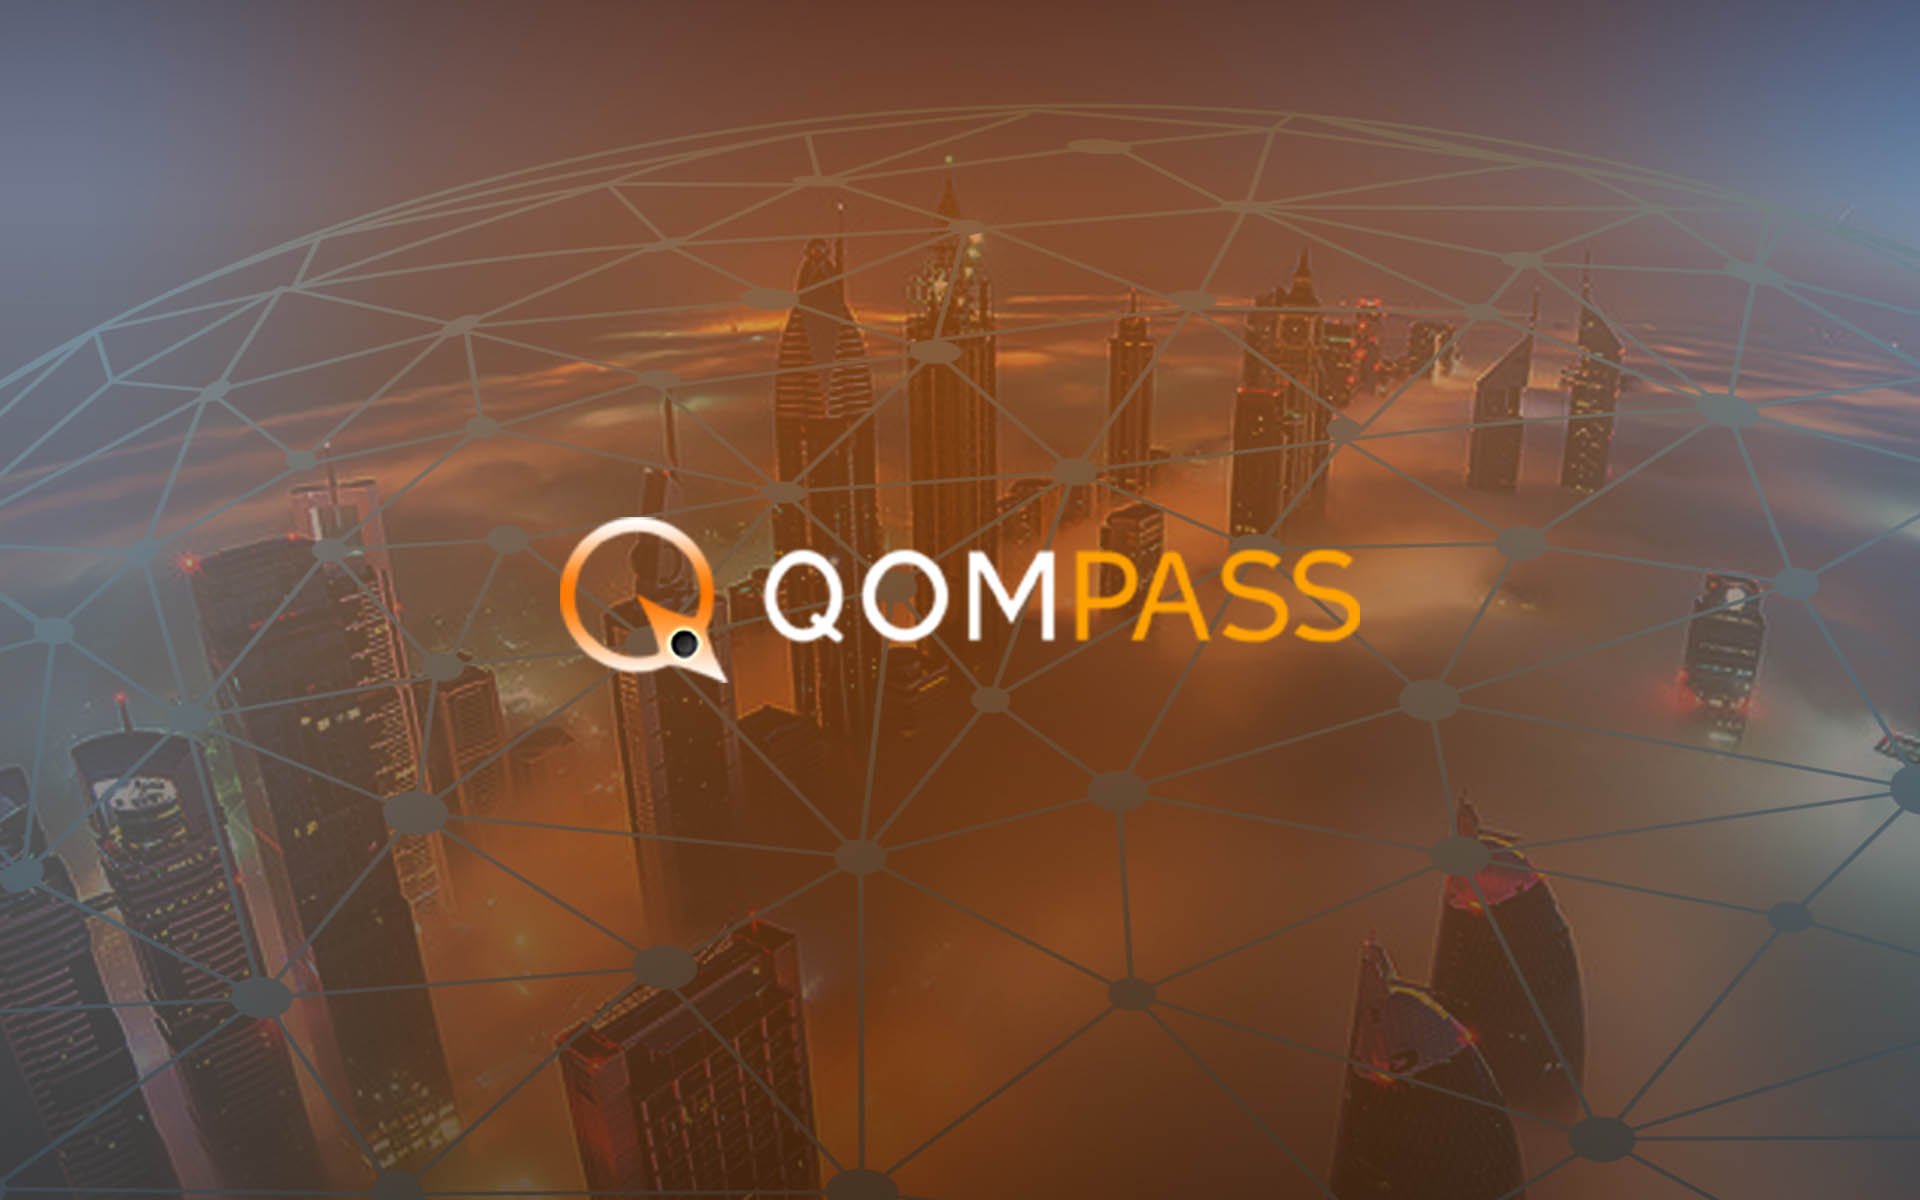 Qompass Announces Airdrop Ahead of Their ICO Pre-Sale Setting The Stage For A Buying Frenzy As They Launch Revolutionary Blockchain Applications & API With Unique User Benefits